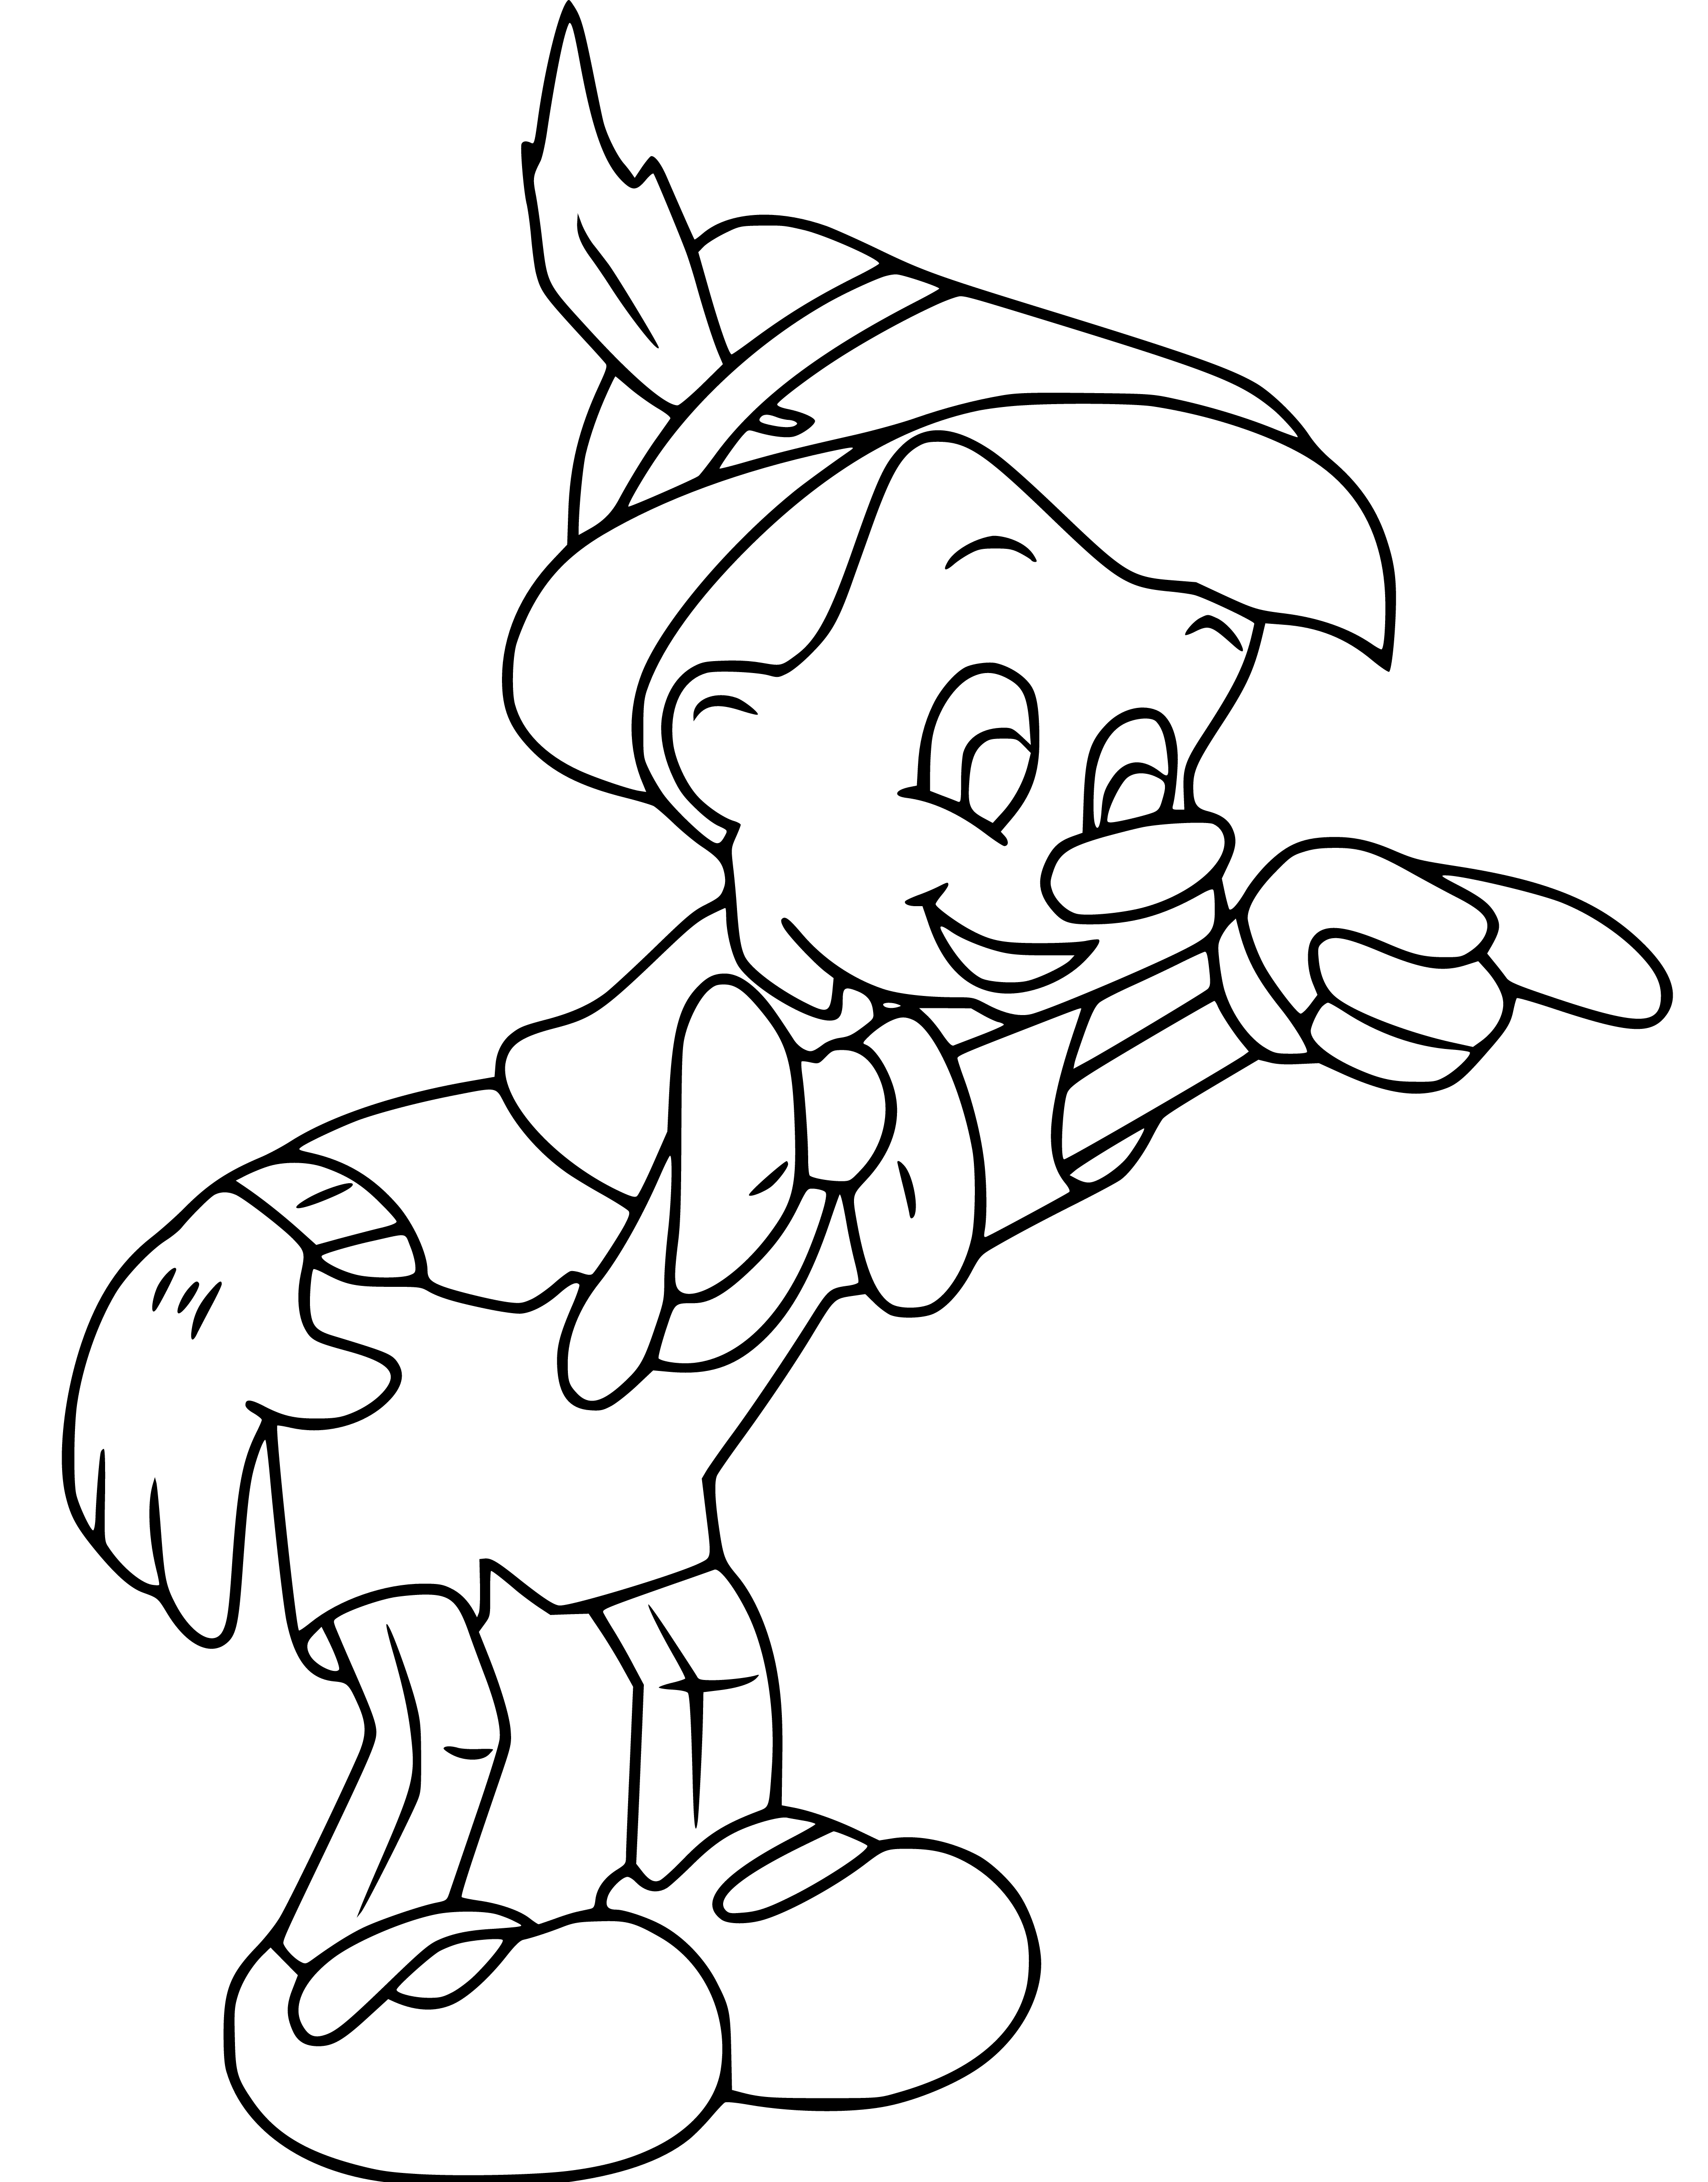 Simple Pinocchio Coloring Page Easy for Kids - SheetalColor.com